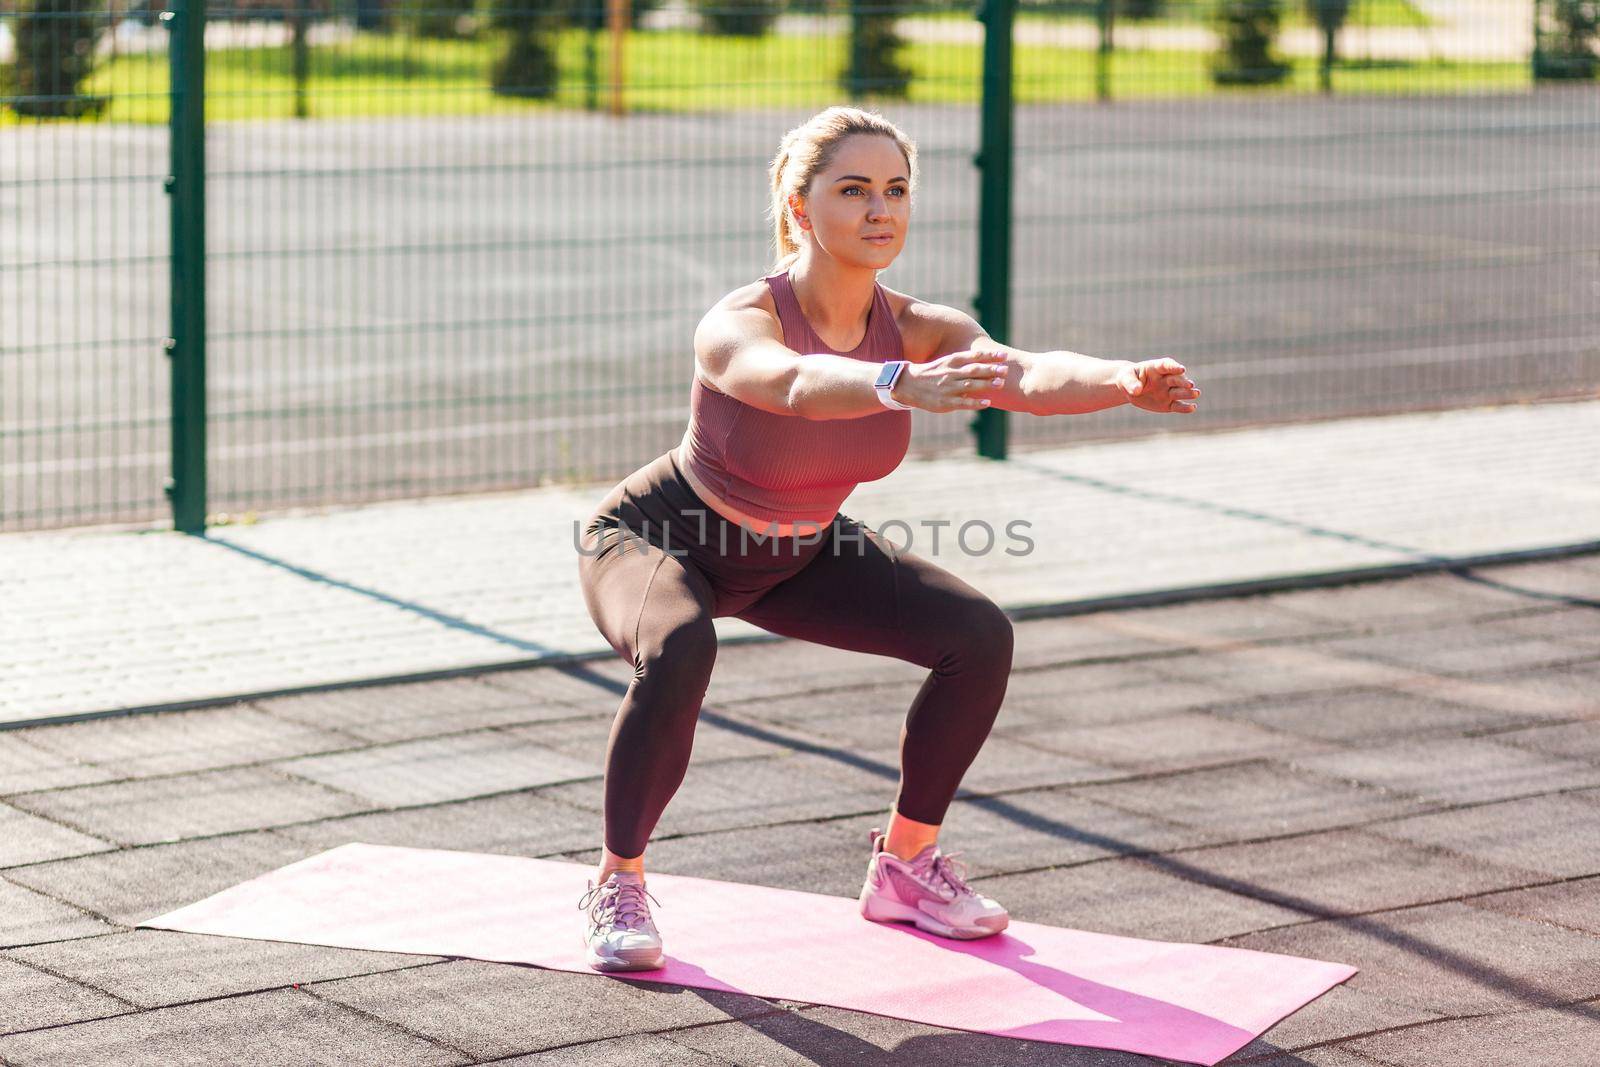 Full length, woman with athletic body in tight pants training on mat outdoor summer day, doing squats with outstretched hands, aerobics or pilates exercise. Health care, sport activity for weight loss